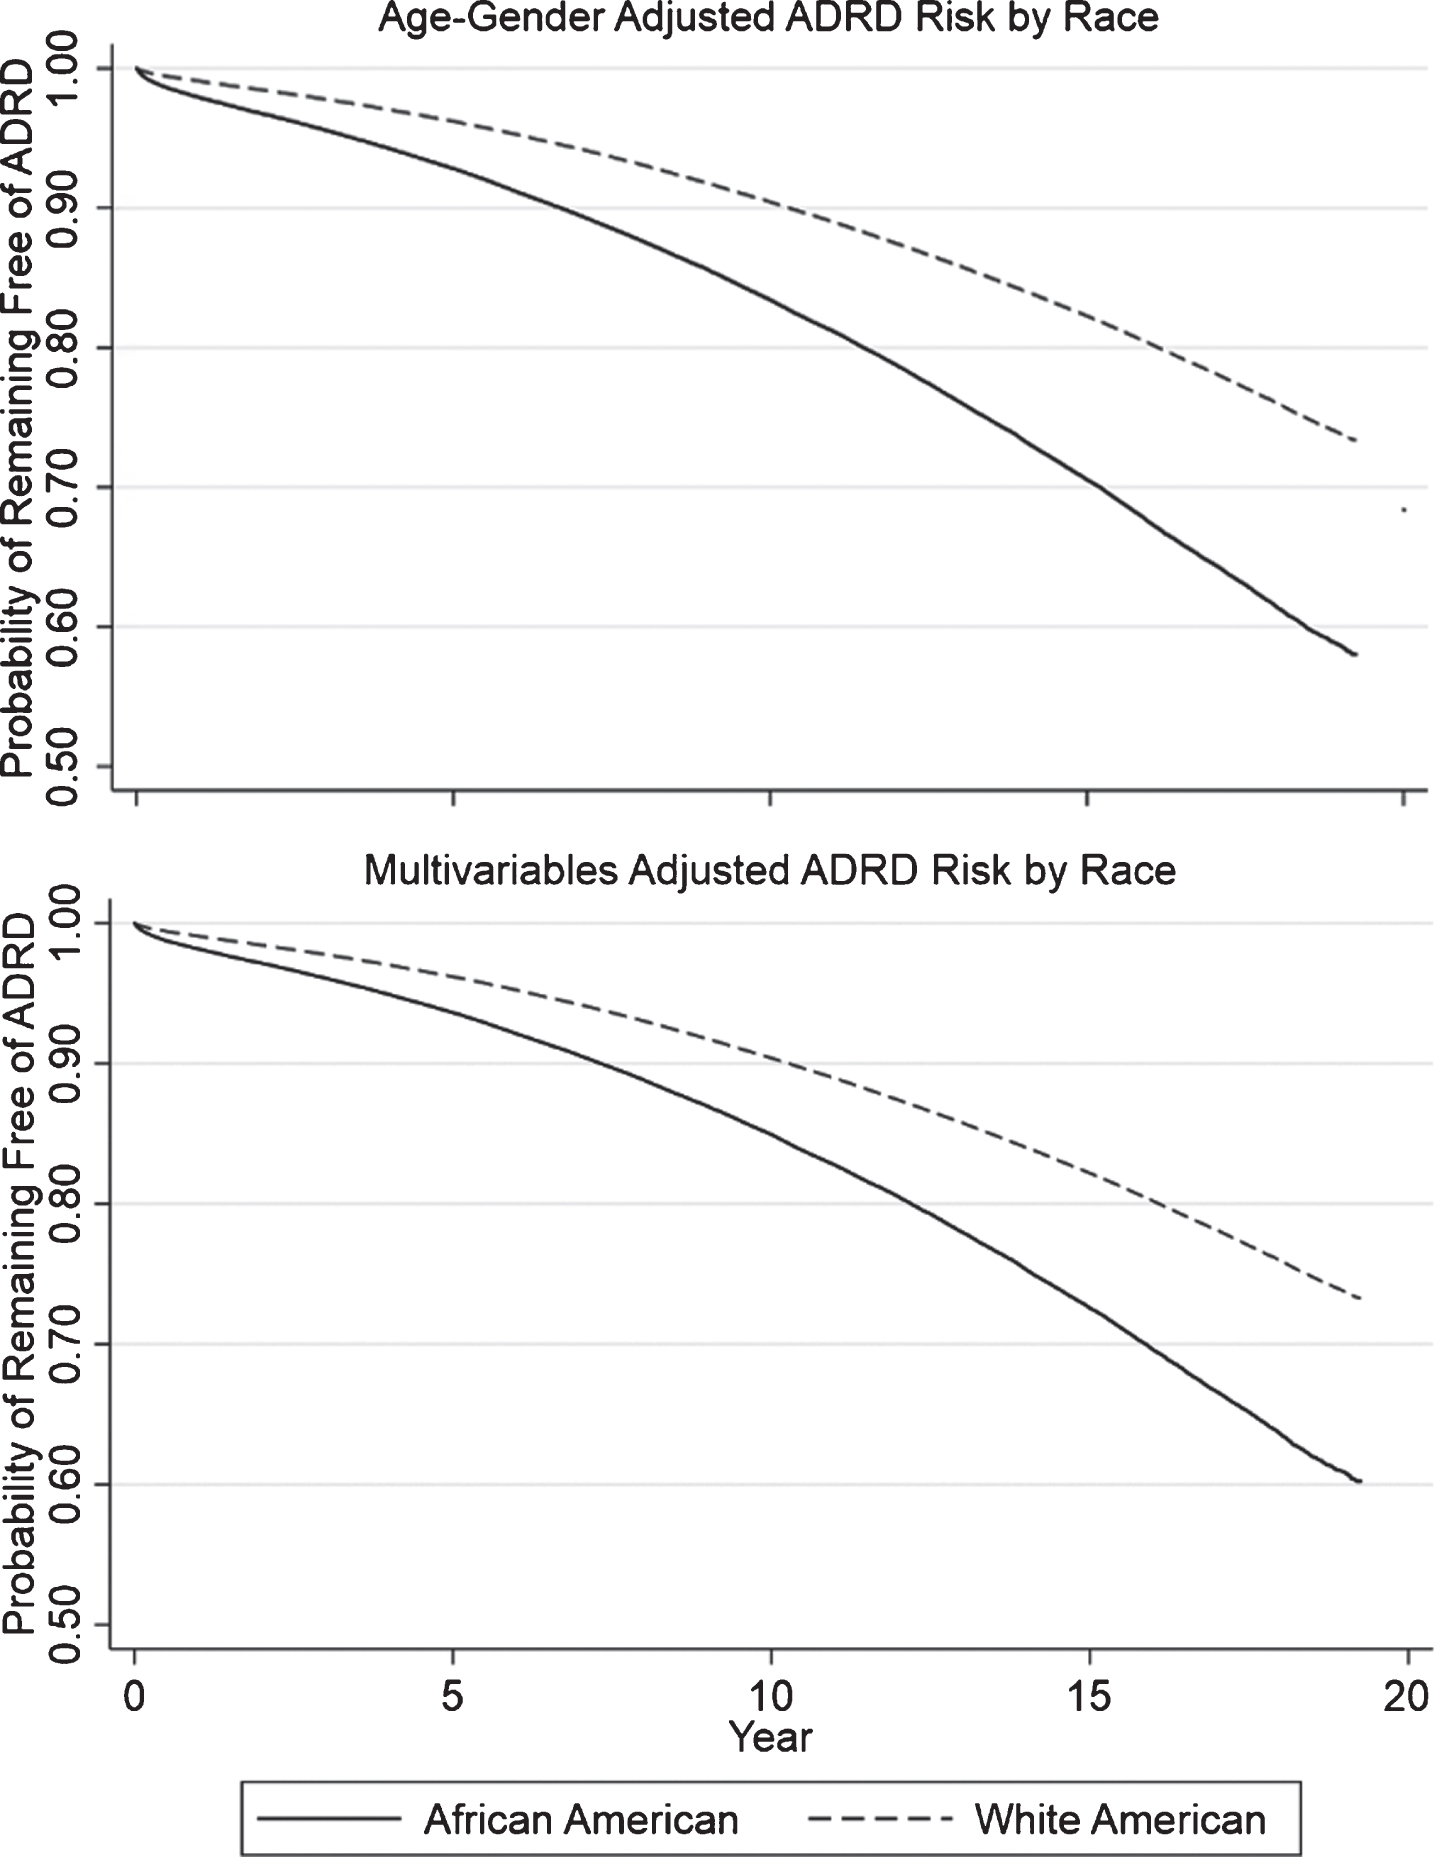 Survival curves of AD/ADRD risk between two races.